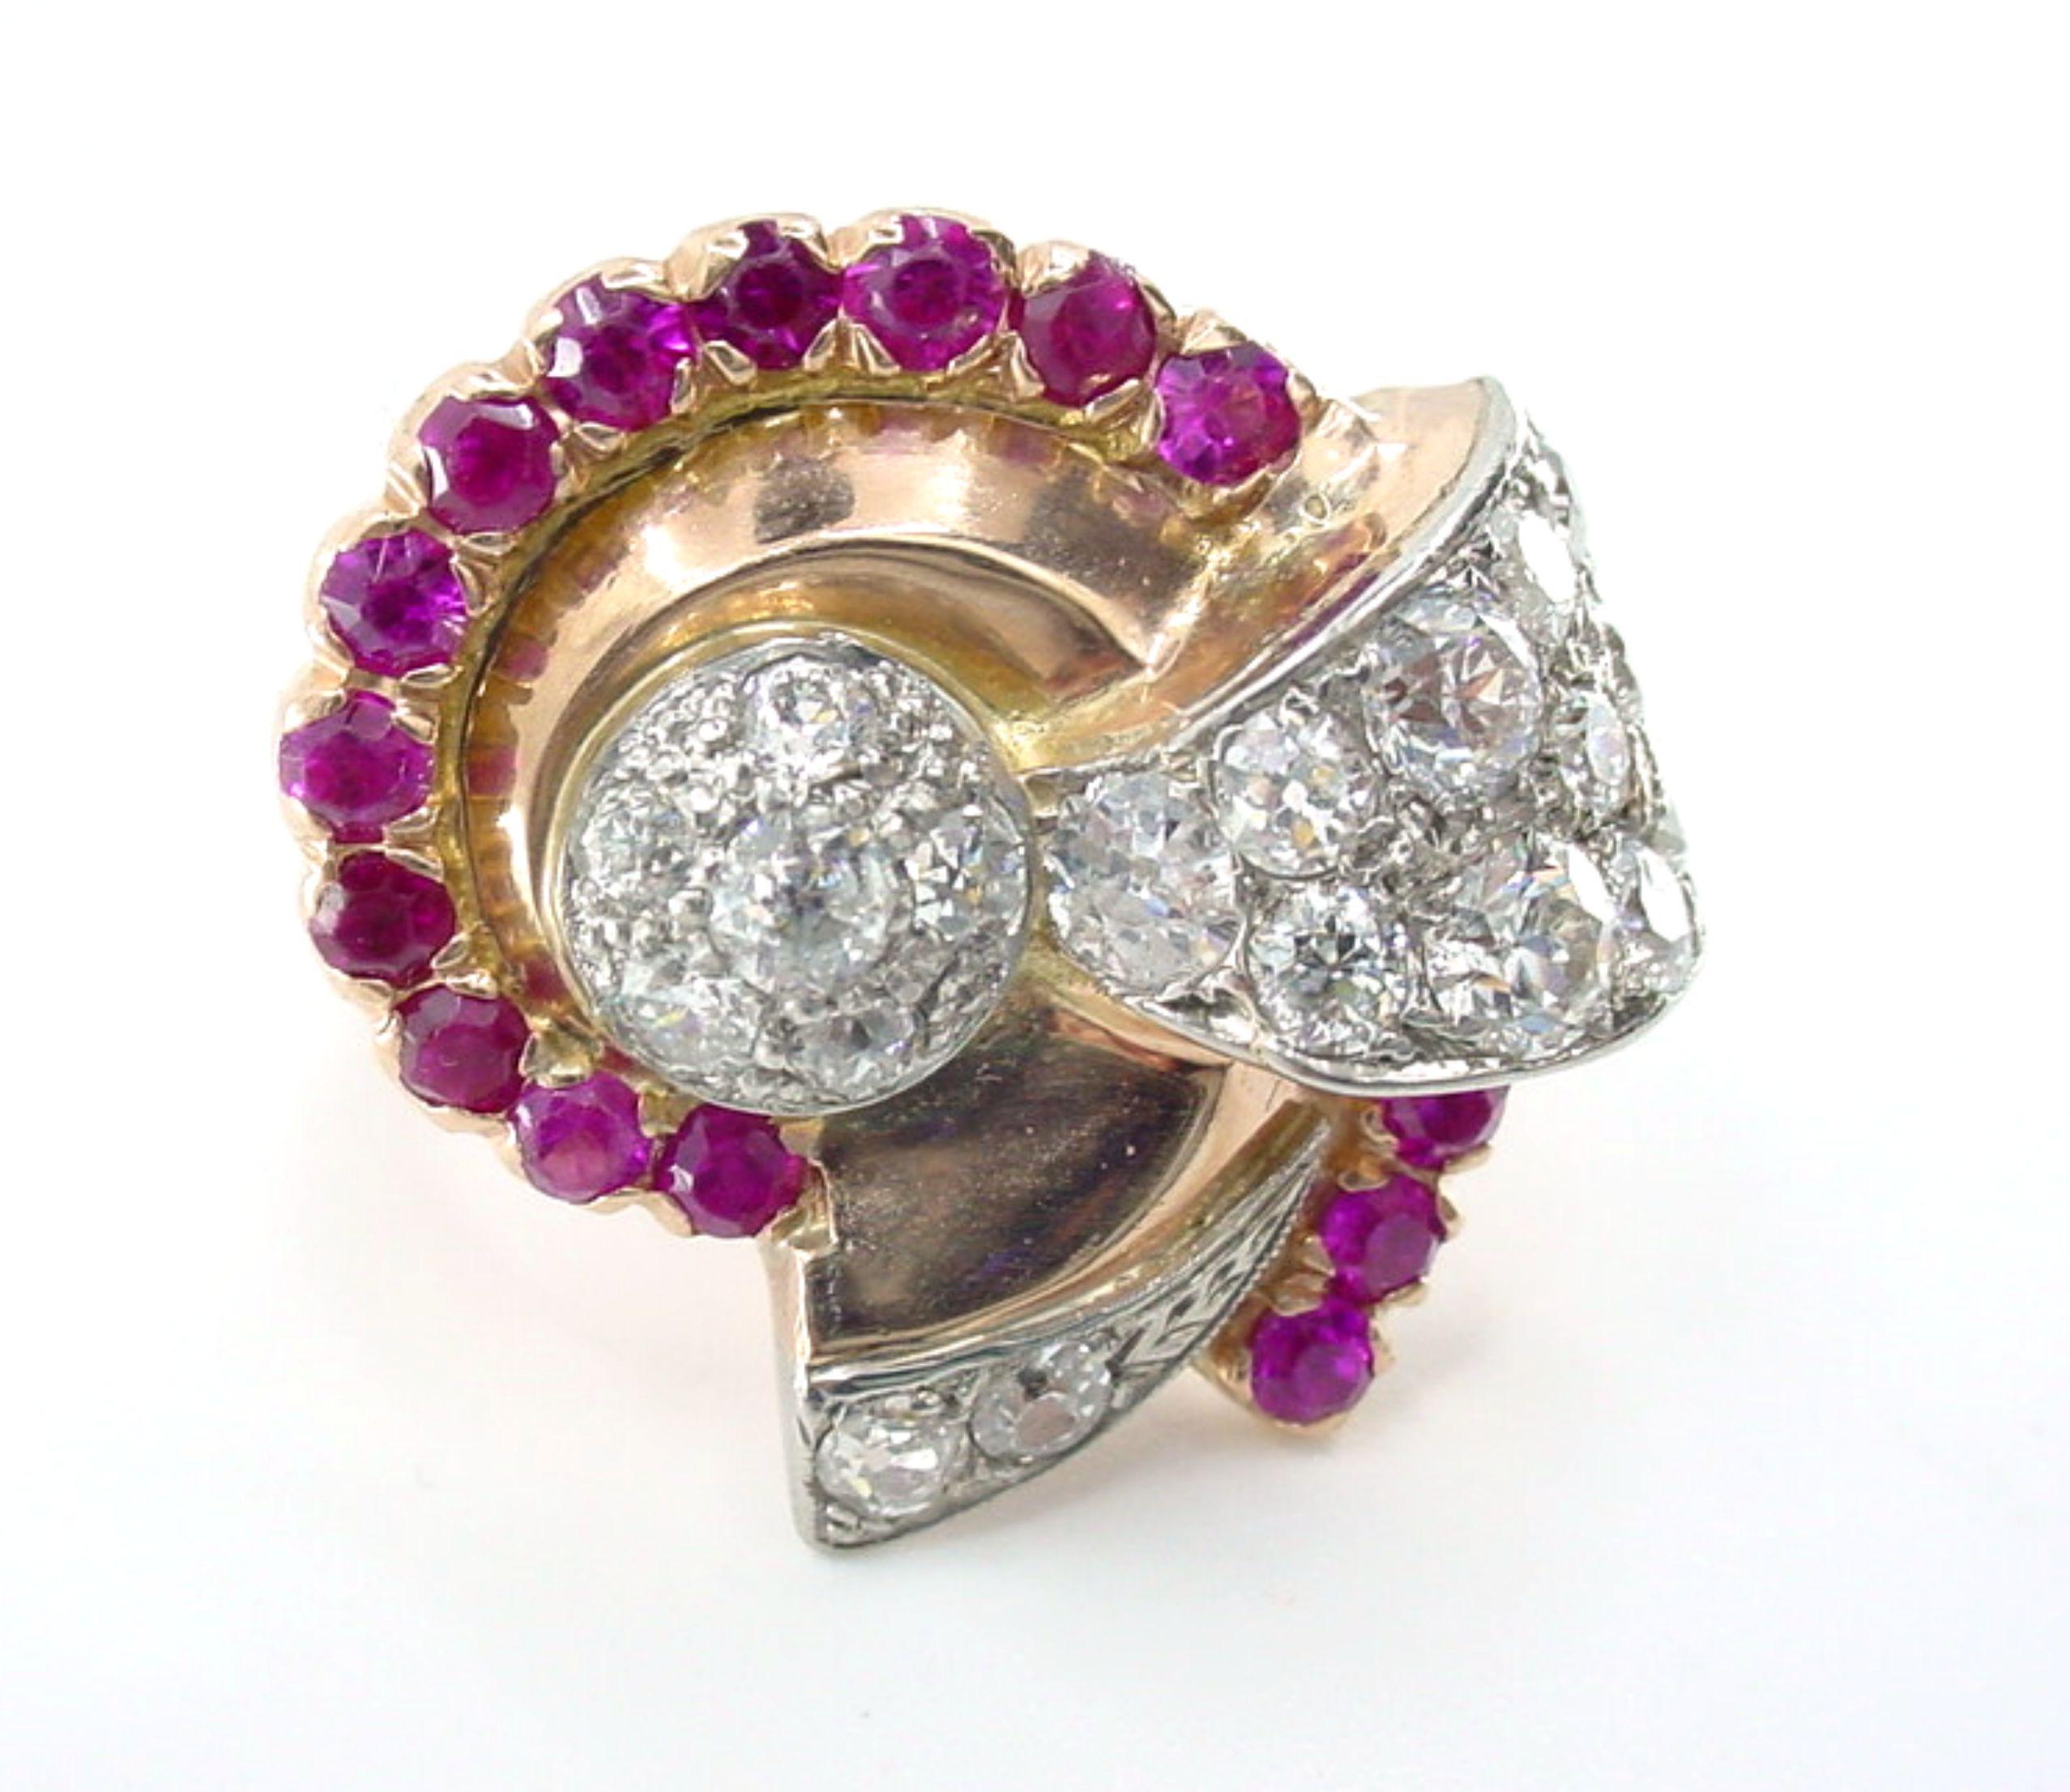 Retro Stunning 2.30 Ct Diamond Platinum 14k Ruby Cocktail Ring-1940s at its Finest For Sale